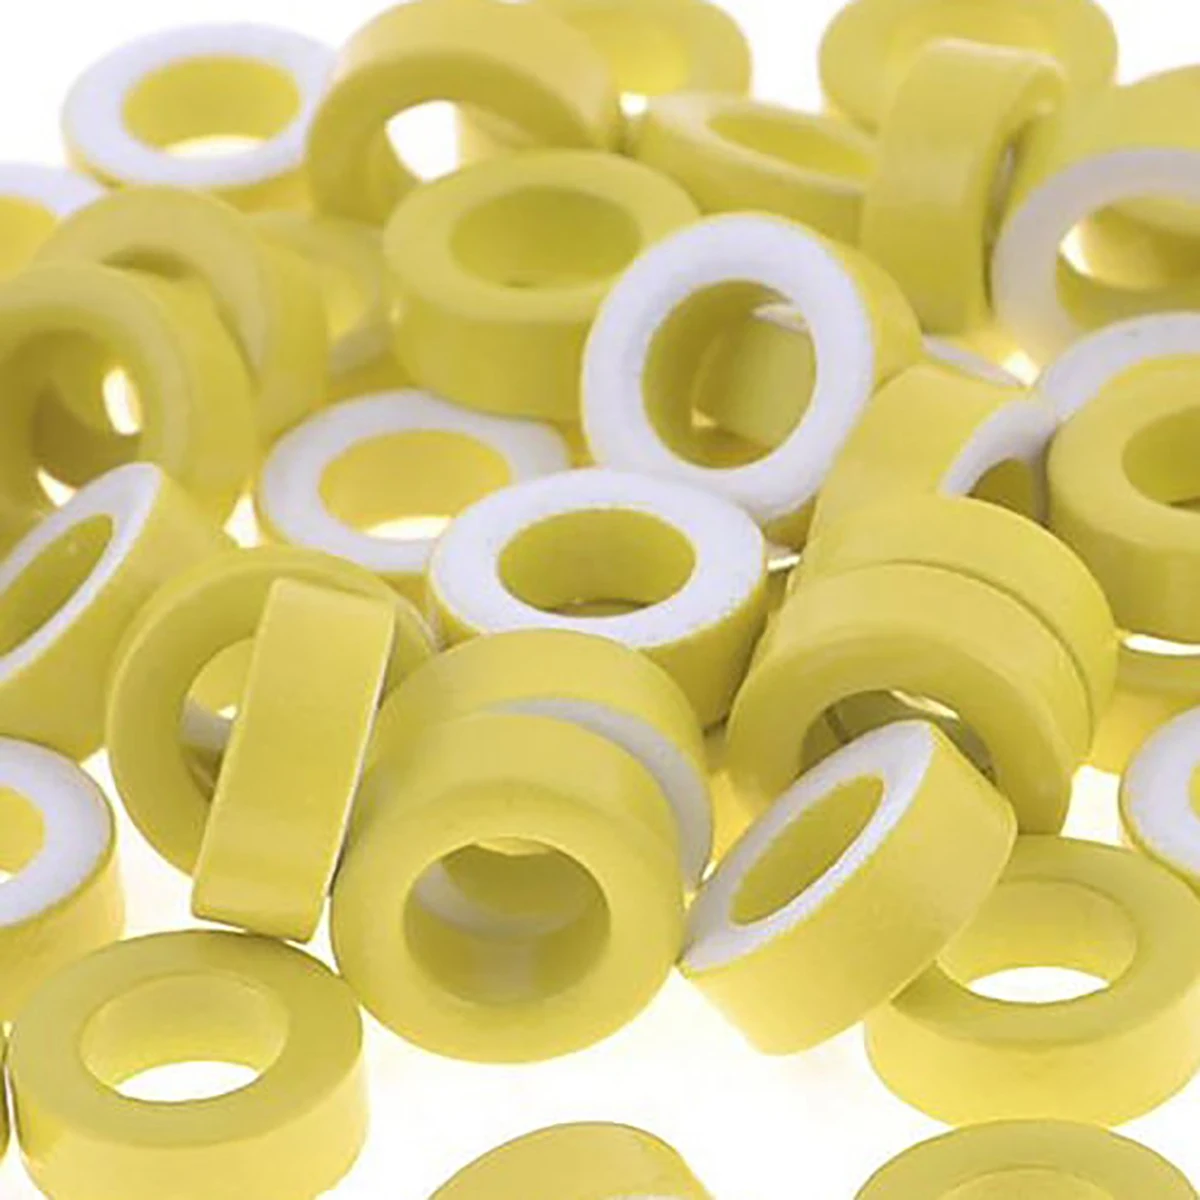 50pcs Toroid Ferrite Cores T50-26  Yellow White Ring Iron Cores For Power Transformers Inductors 7.5mm Inner Diameter